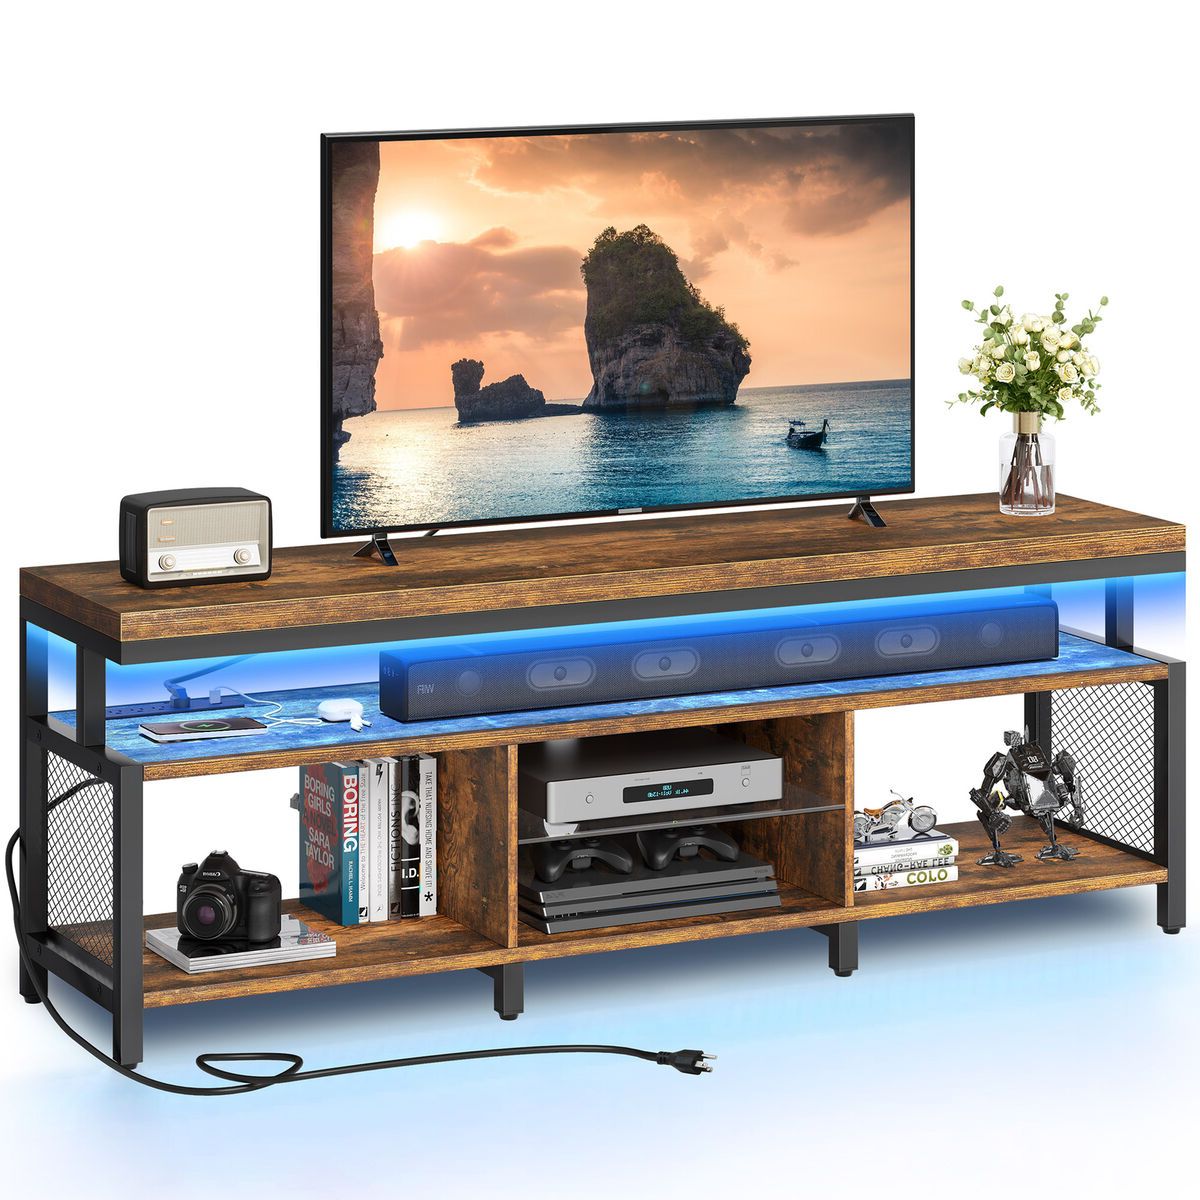 Industrial Led Tv Stand With Power Outlet Media Console For 50/60/65/70" Tvs  | Ebay Regarding Led Tv Stands With Outlet (Gallery 1 of 20)